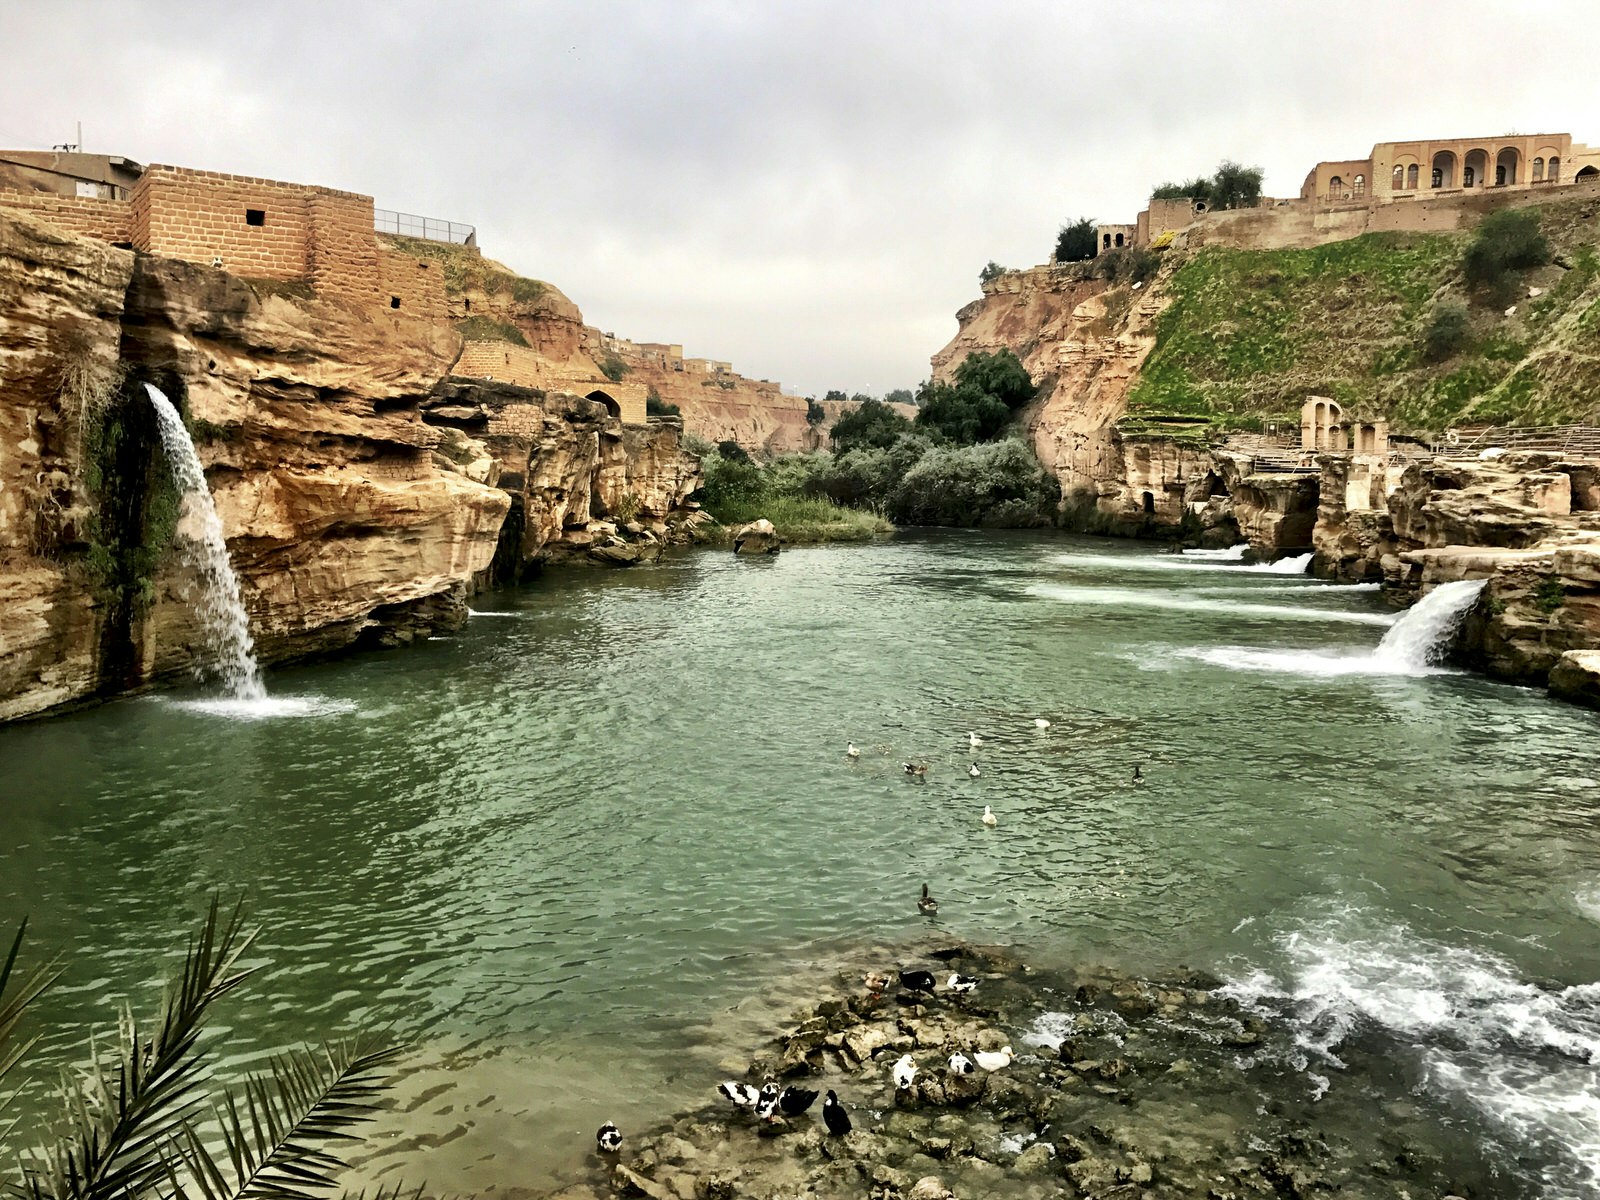 Shushtar Hydraulic System is still an engineering marvel © Steve Waters / Lonely Planet